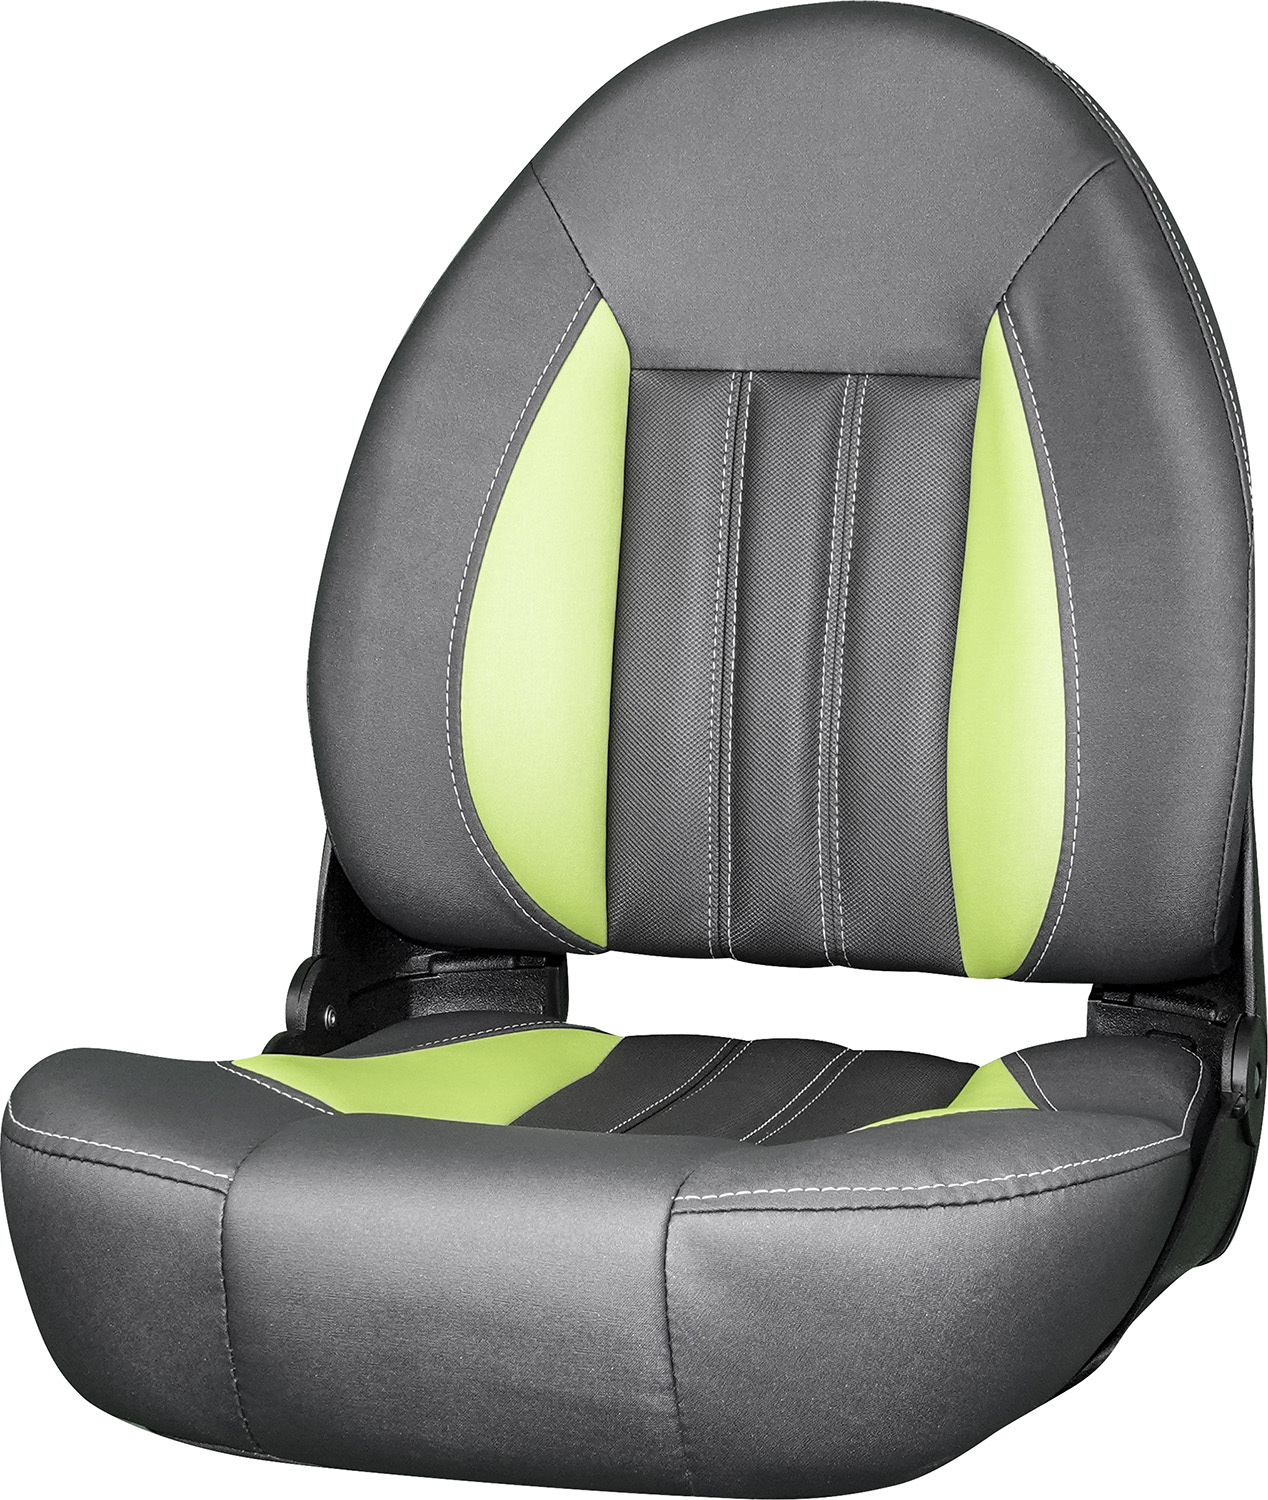 ProBax Orthopedic Limited Edition Boat Seat – Store – TEMPRESS